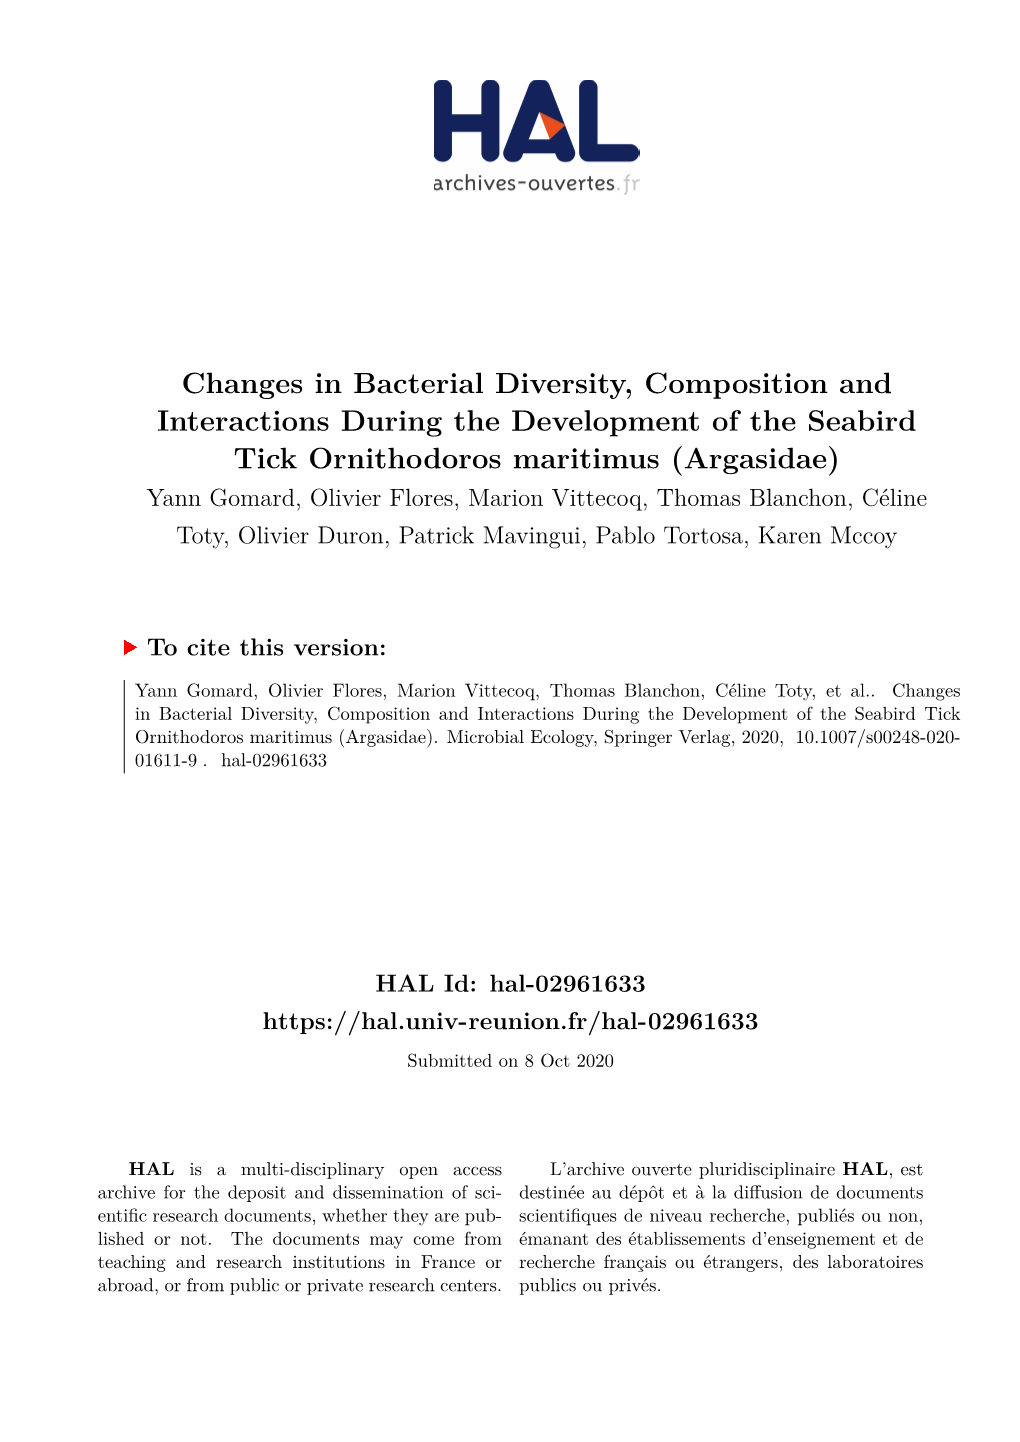 Changes in Bacterial Diversity, Composition And